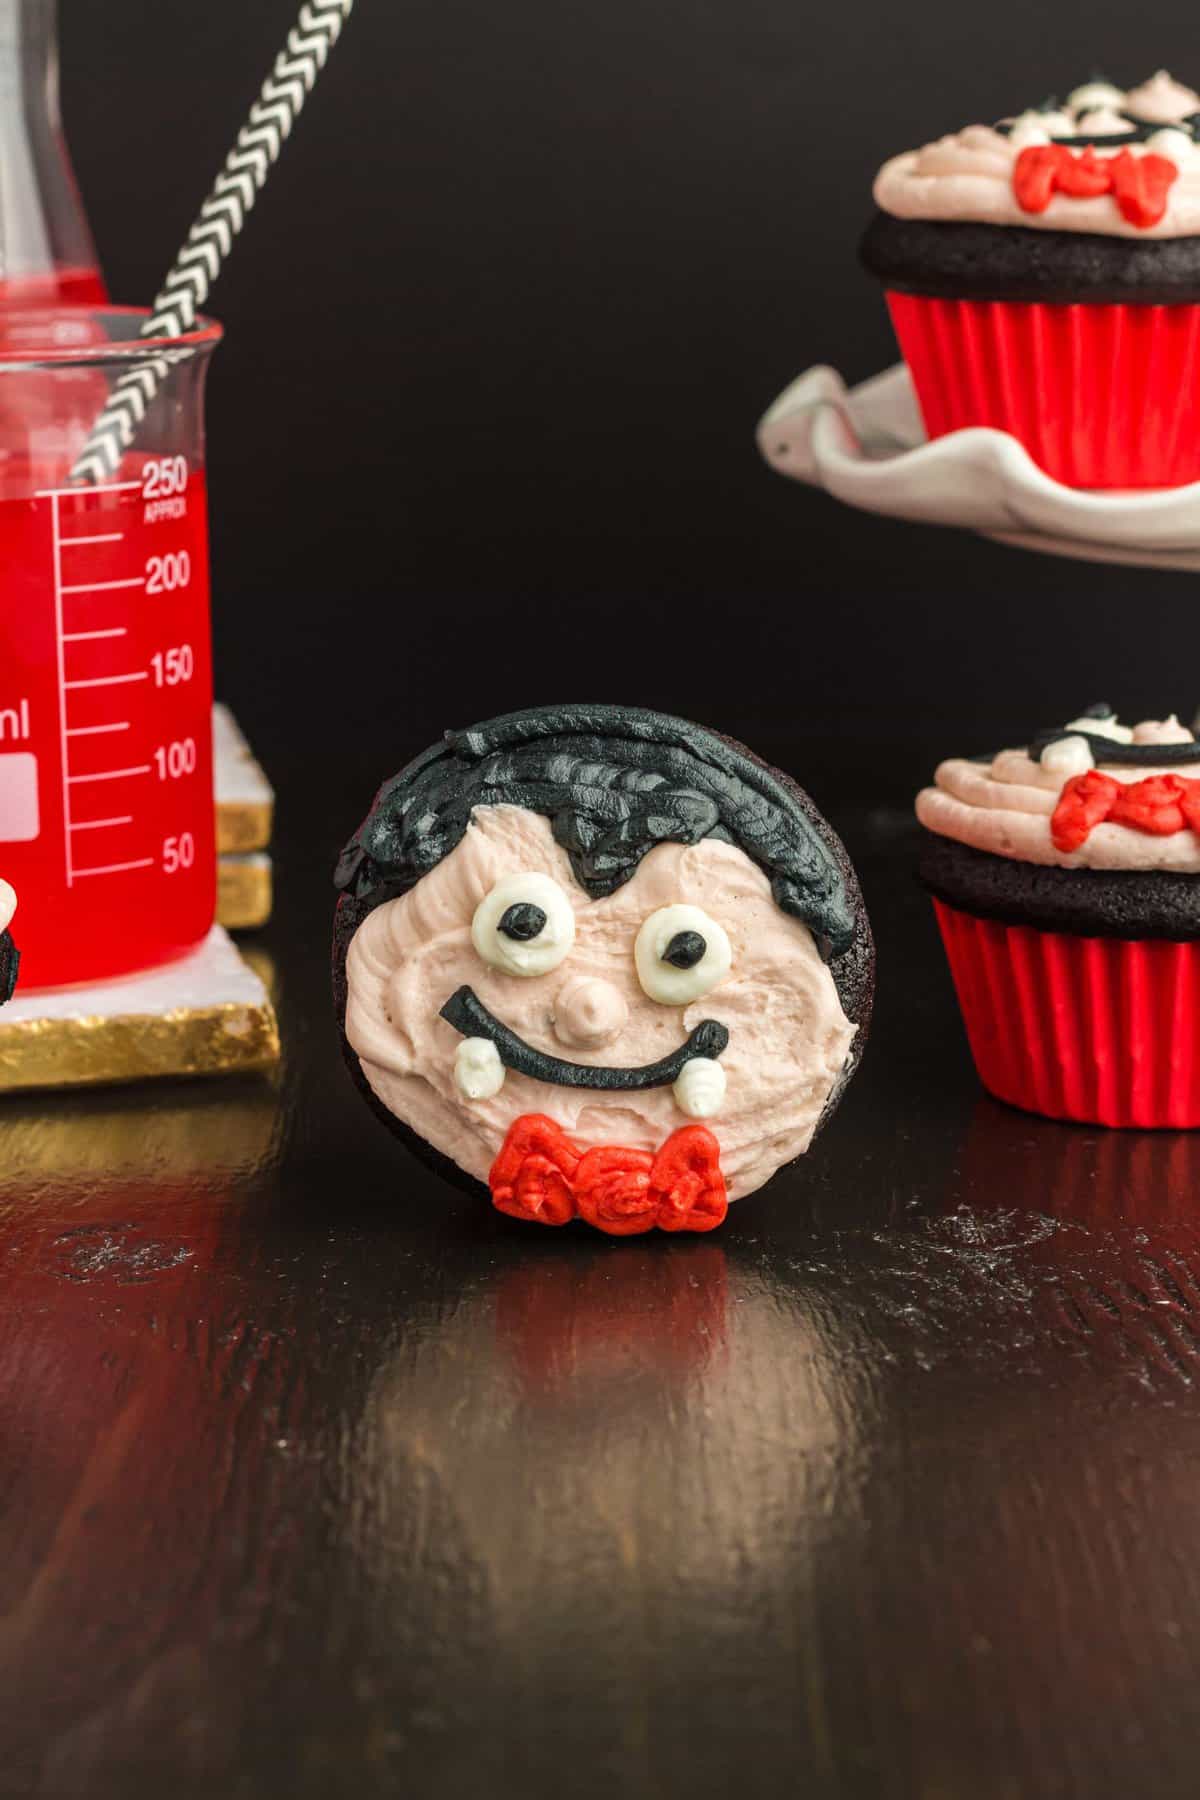 Cupcake on its side to show vampire face with white cake plate in the background.